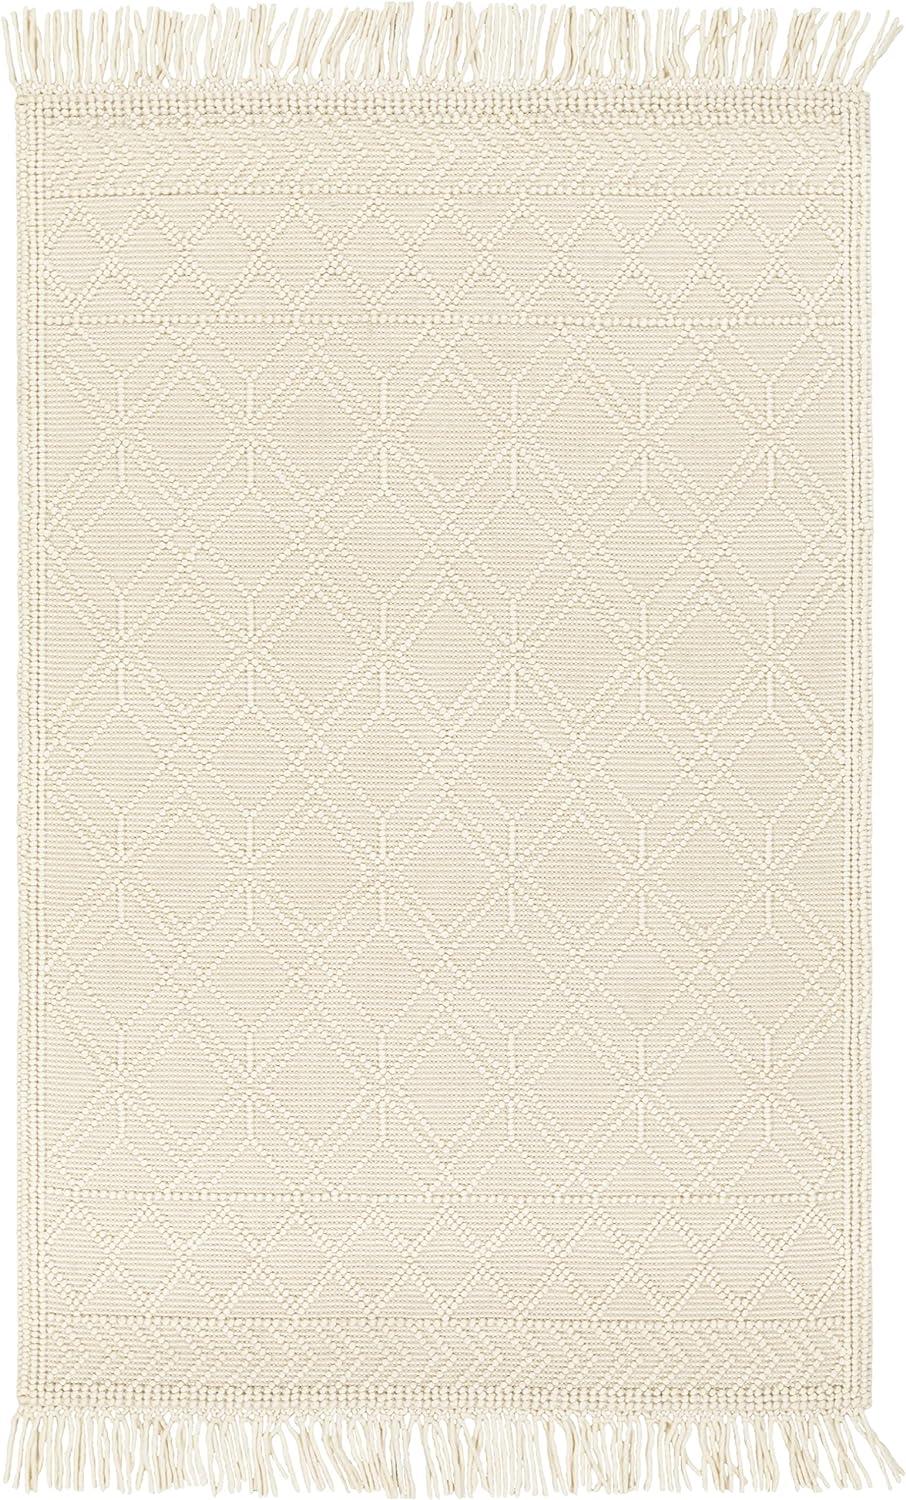 Serene Haven Hand-Knotted Wool Beige Area Rug, 8' x 10'